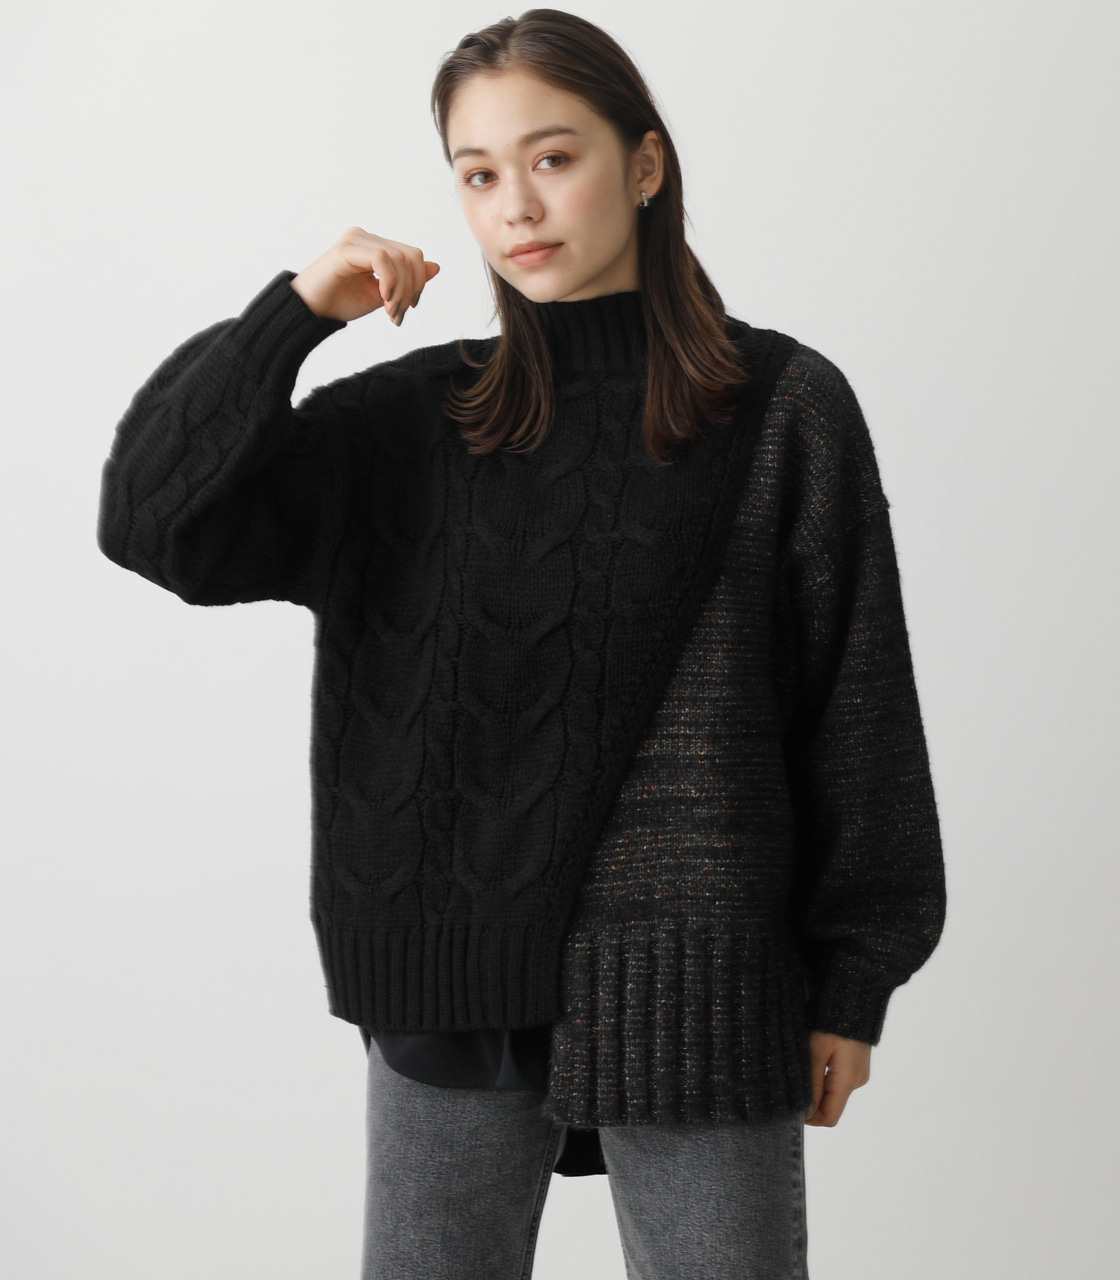 ASYMMETRY CABLE KNIT TOPS/アシンメトリーケーブルニットトップス 詳細画像 BLK 1